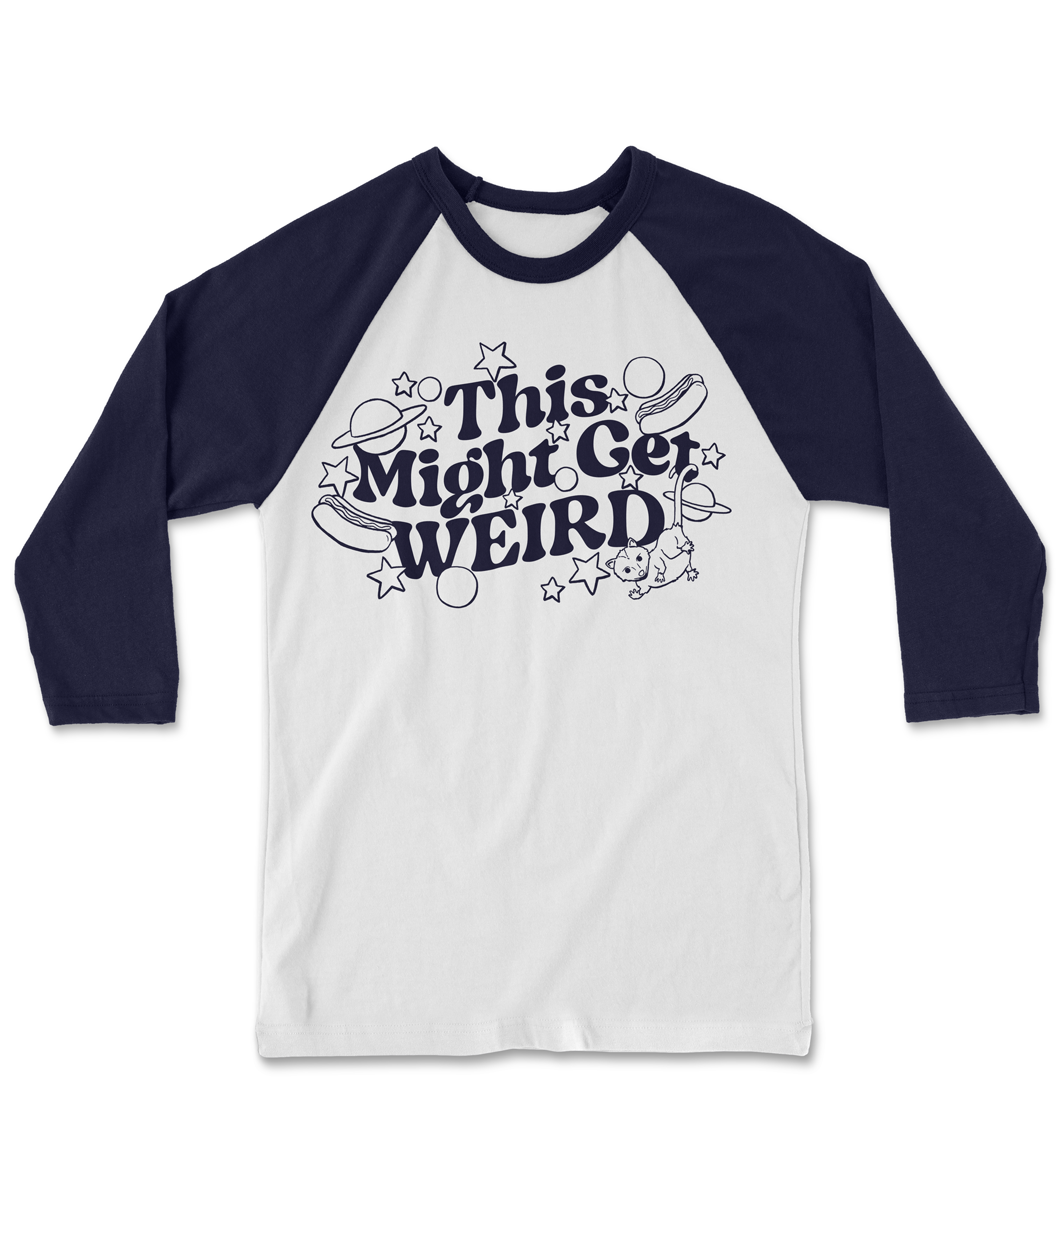 A white baseball tee with dark blue arms and fun, curvy dark blue text that reads 